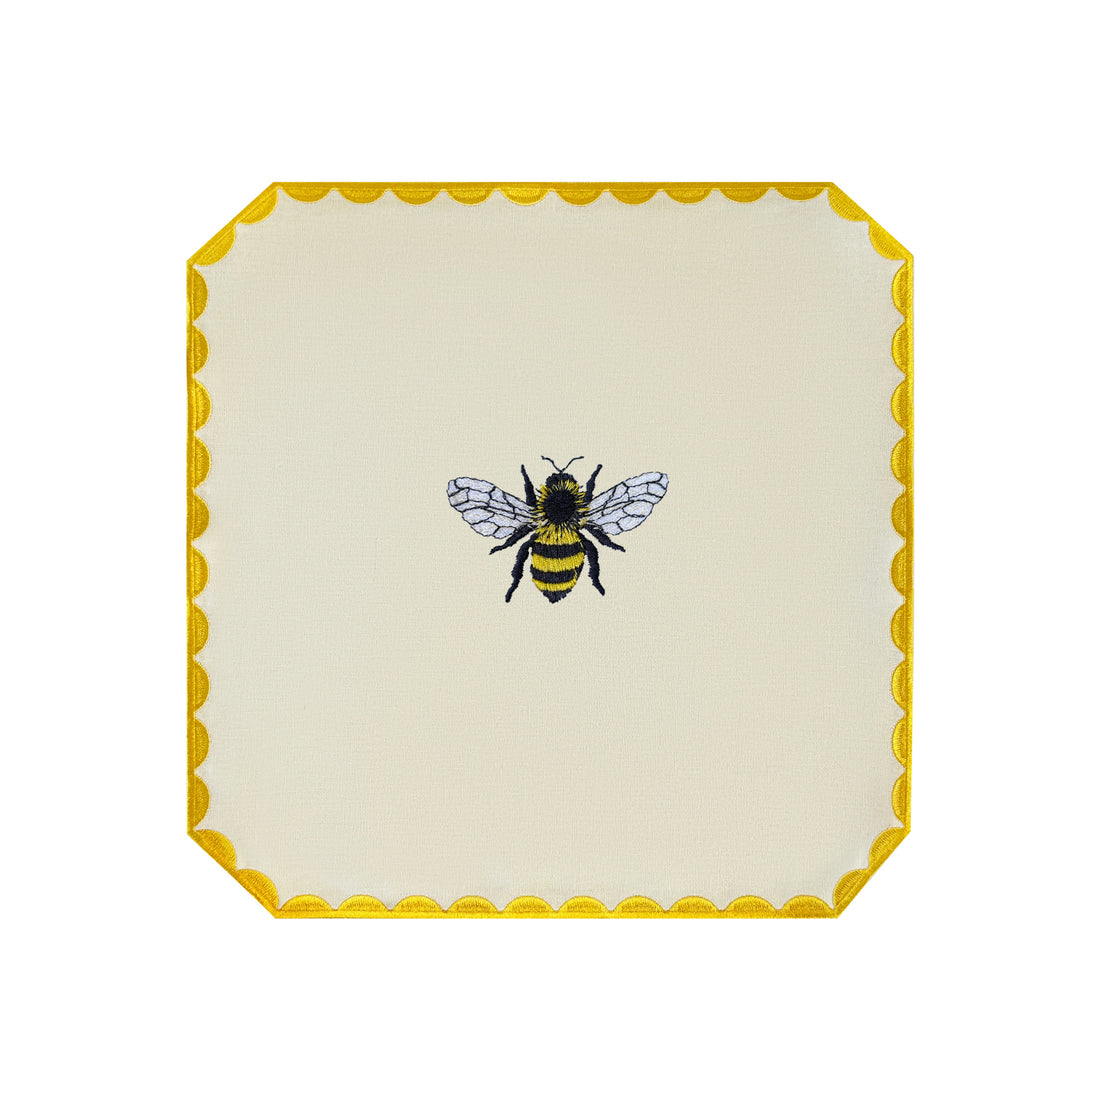 Bee Napkins & Placemats Set of 4